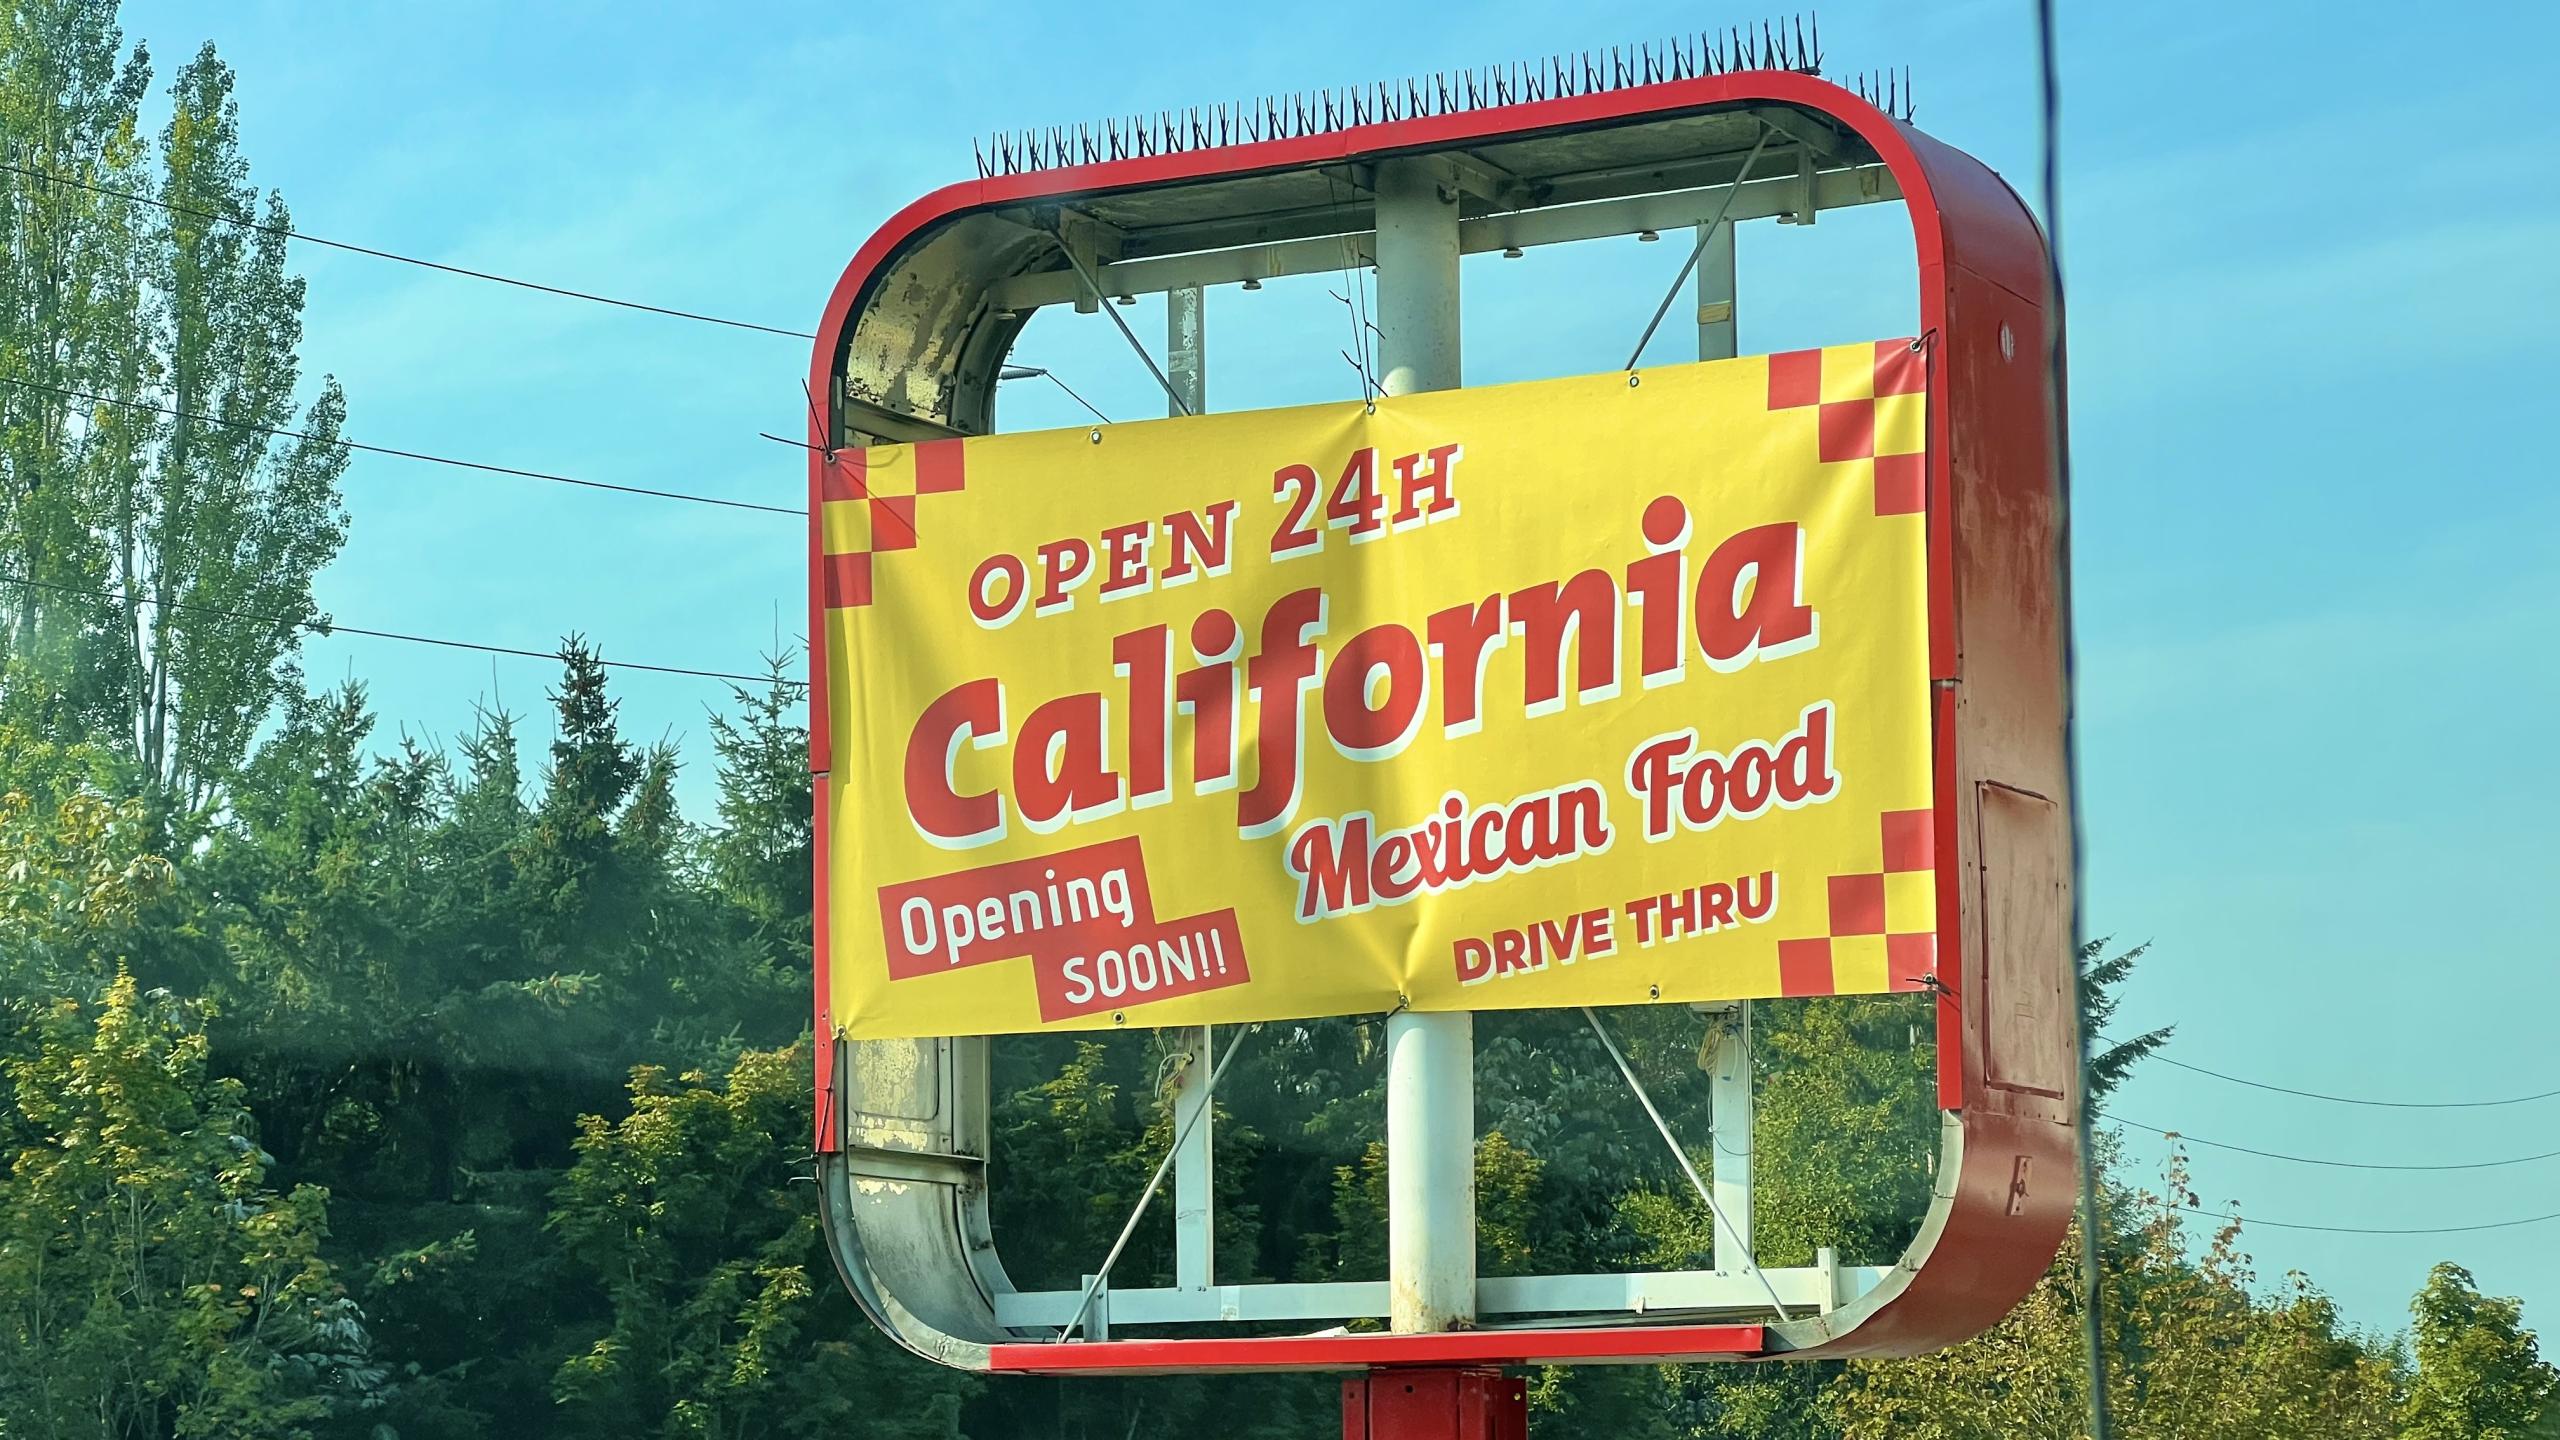 The California Mexican Food restaurant pre-opening sign in Bellevue, Washington.